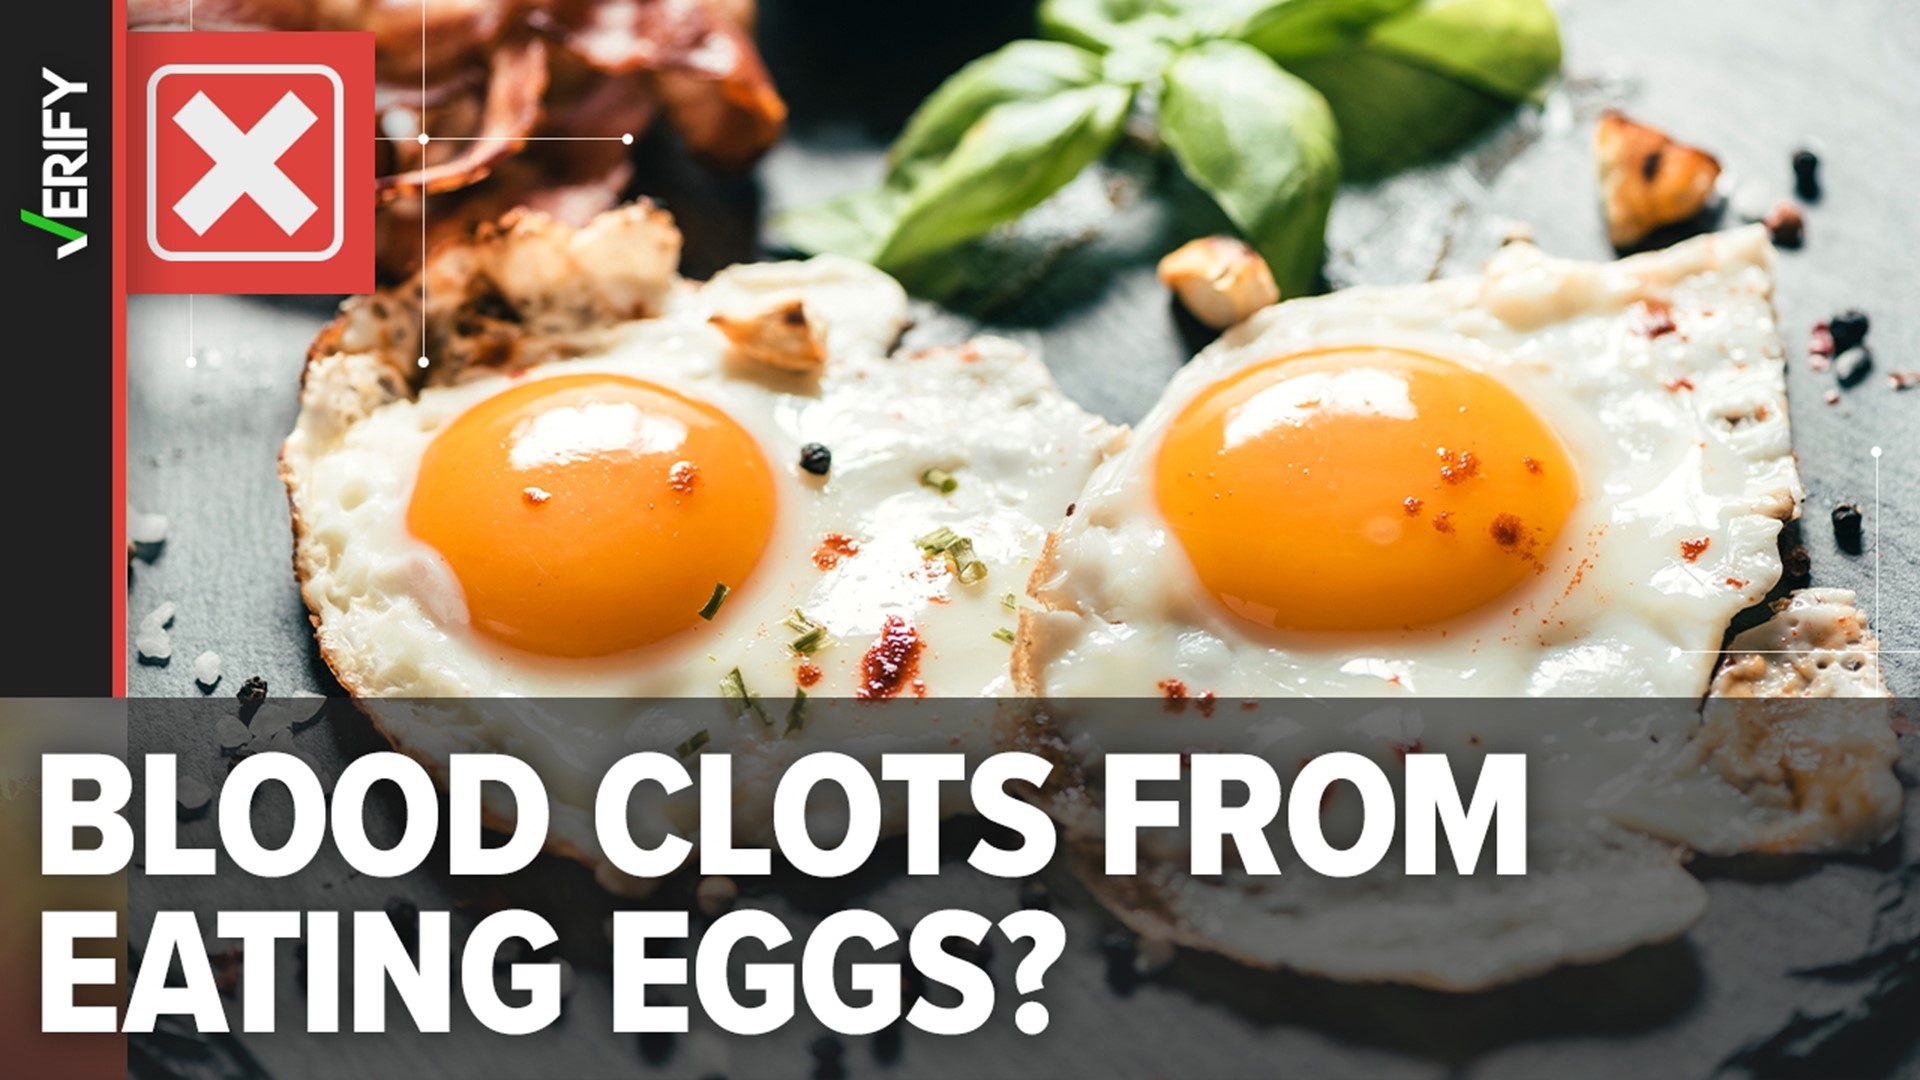 Scientists did not find a link between eating eggs and blood clots. An online article misrepresents a Cleveland Clinic study.